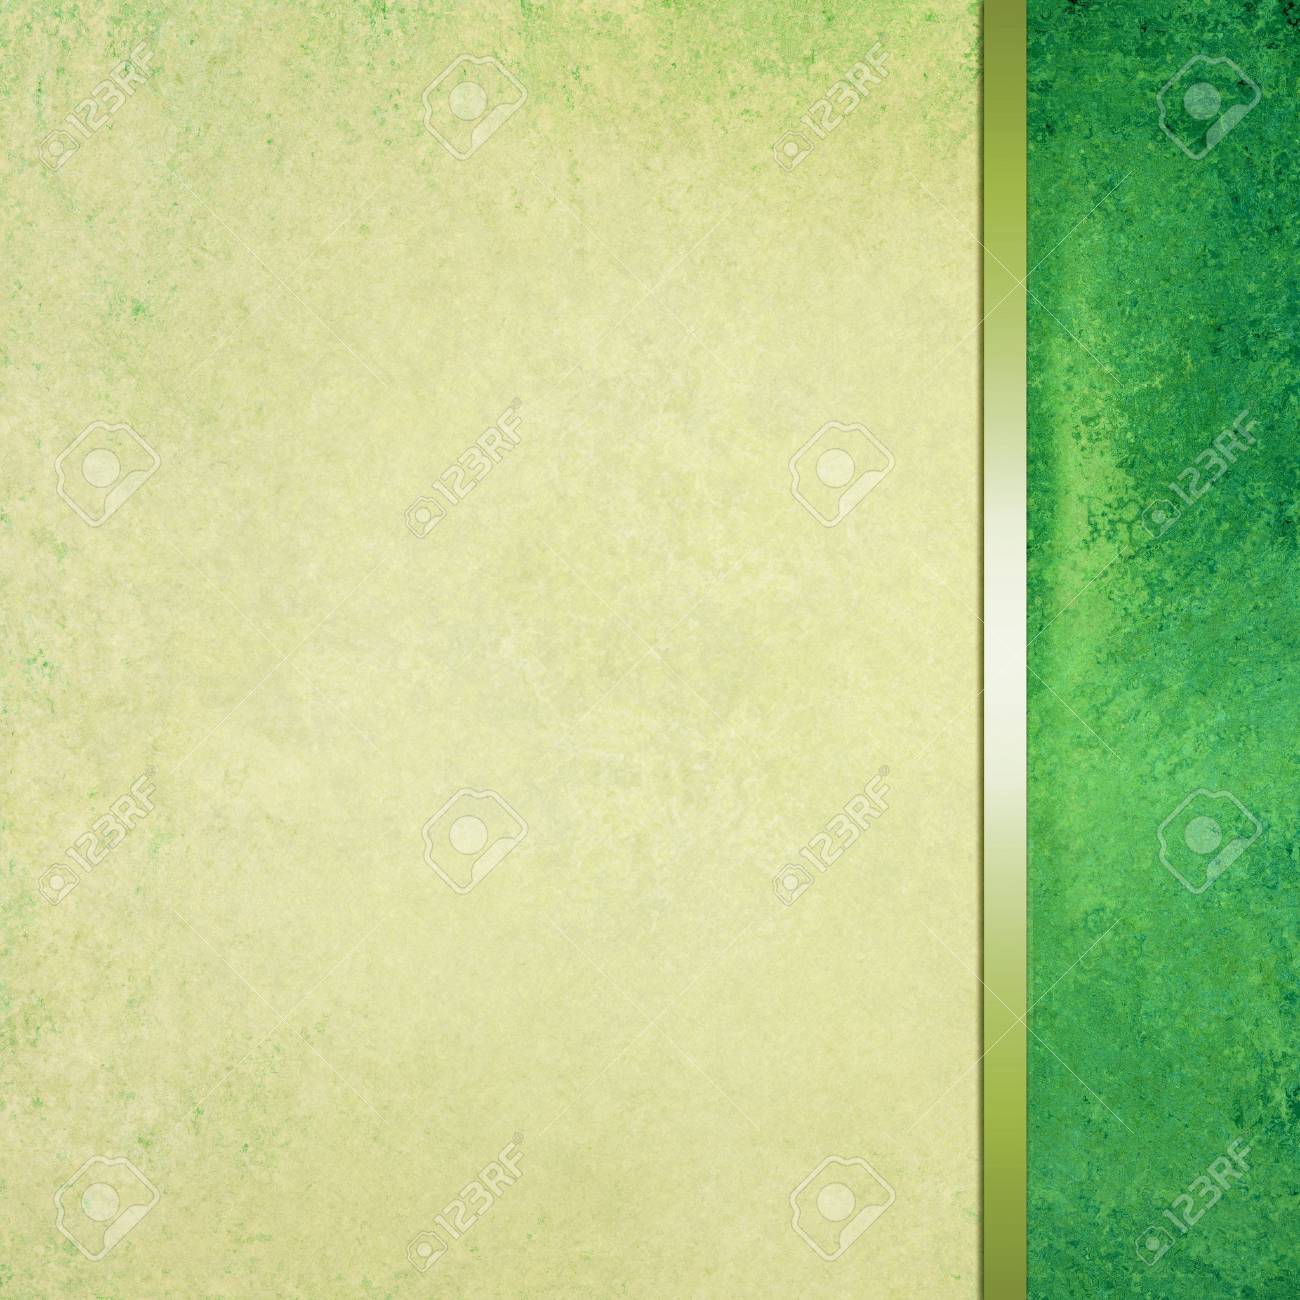 Abstract Background With Green Sidebar And Ribbon Trim Border